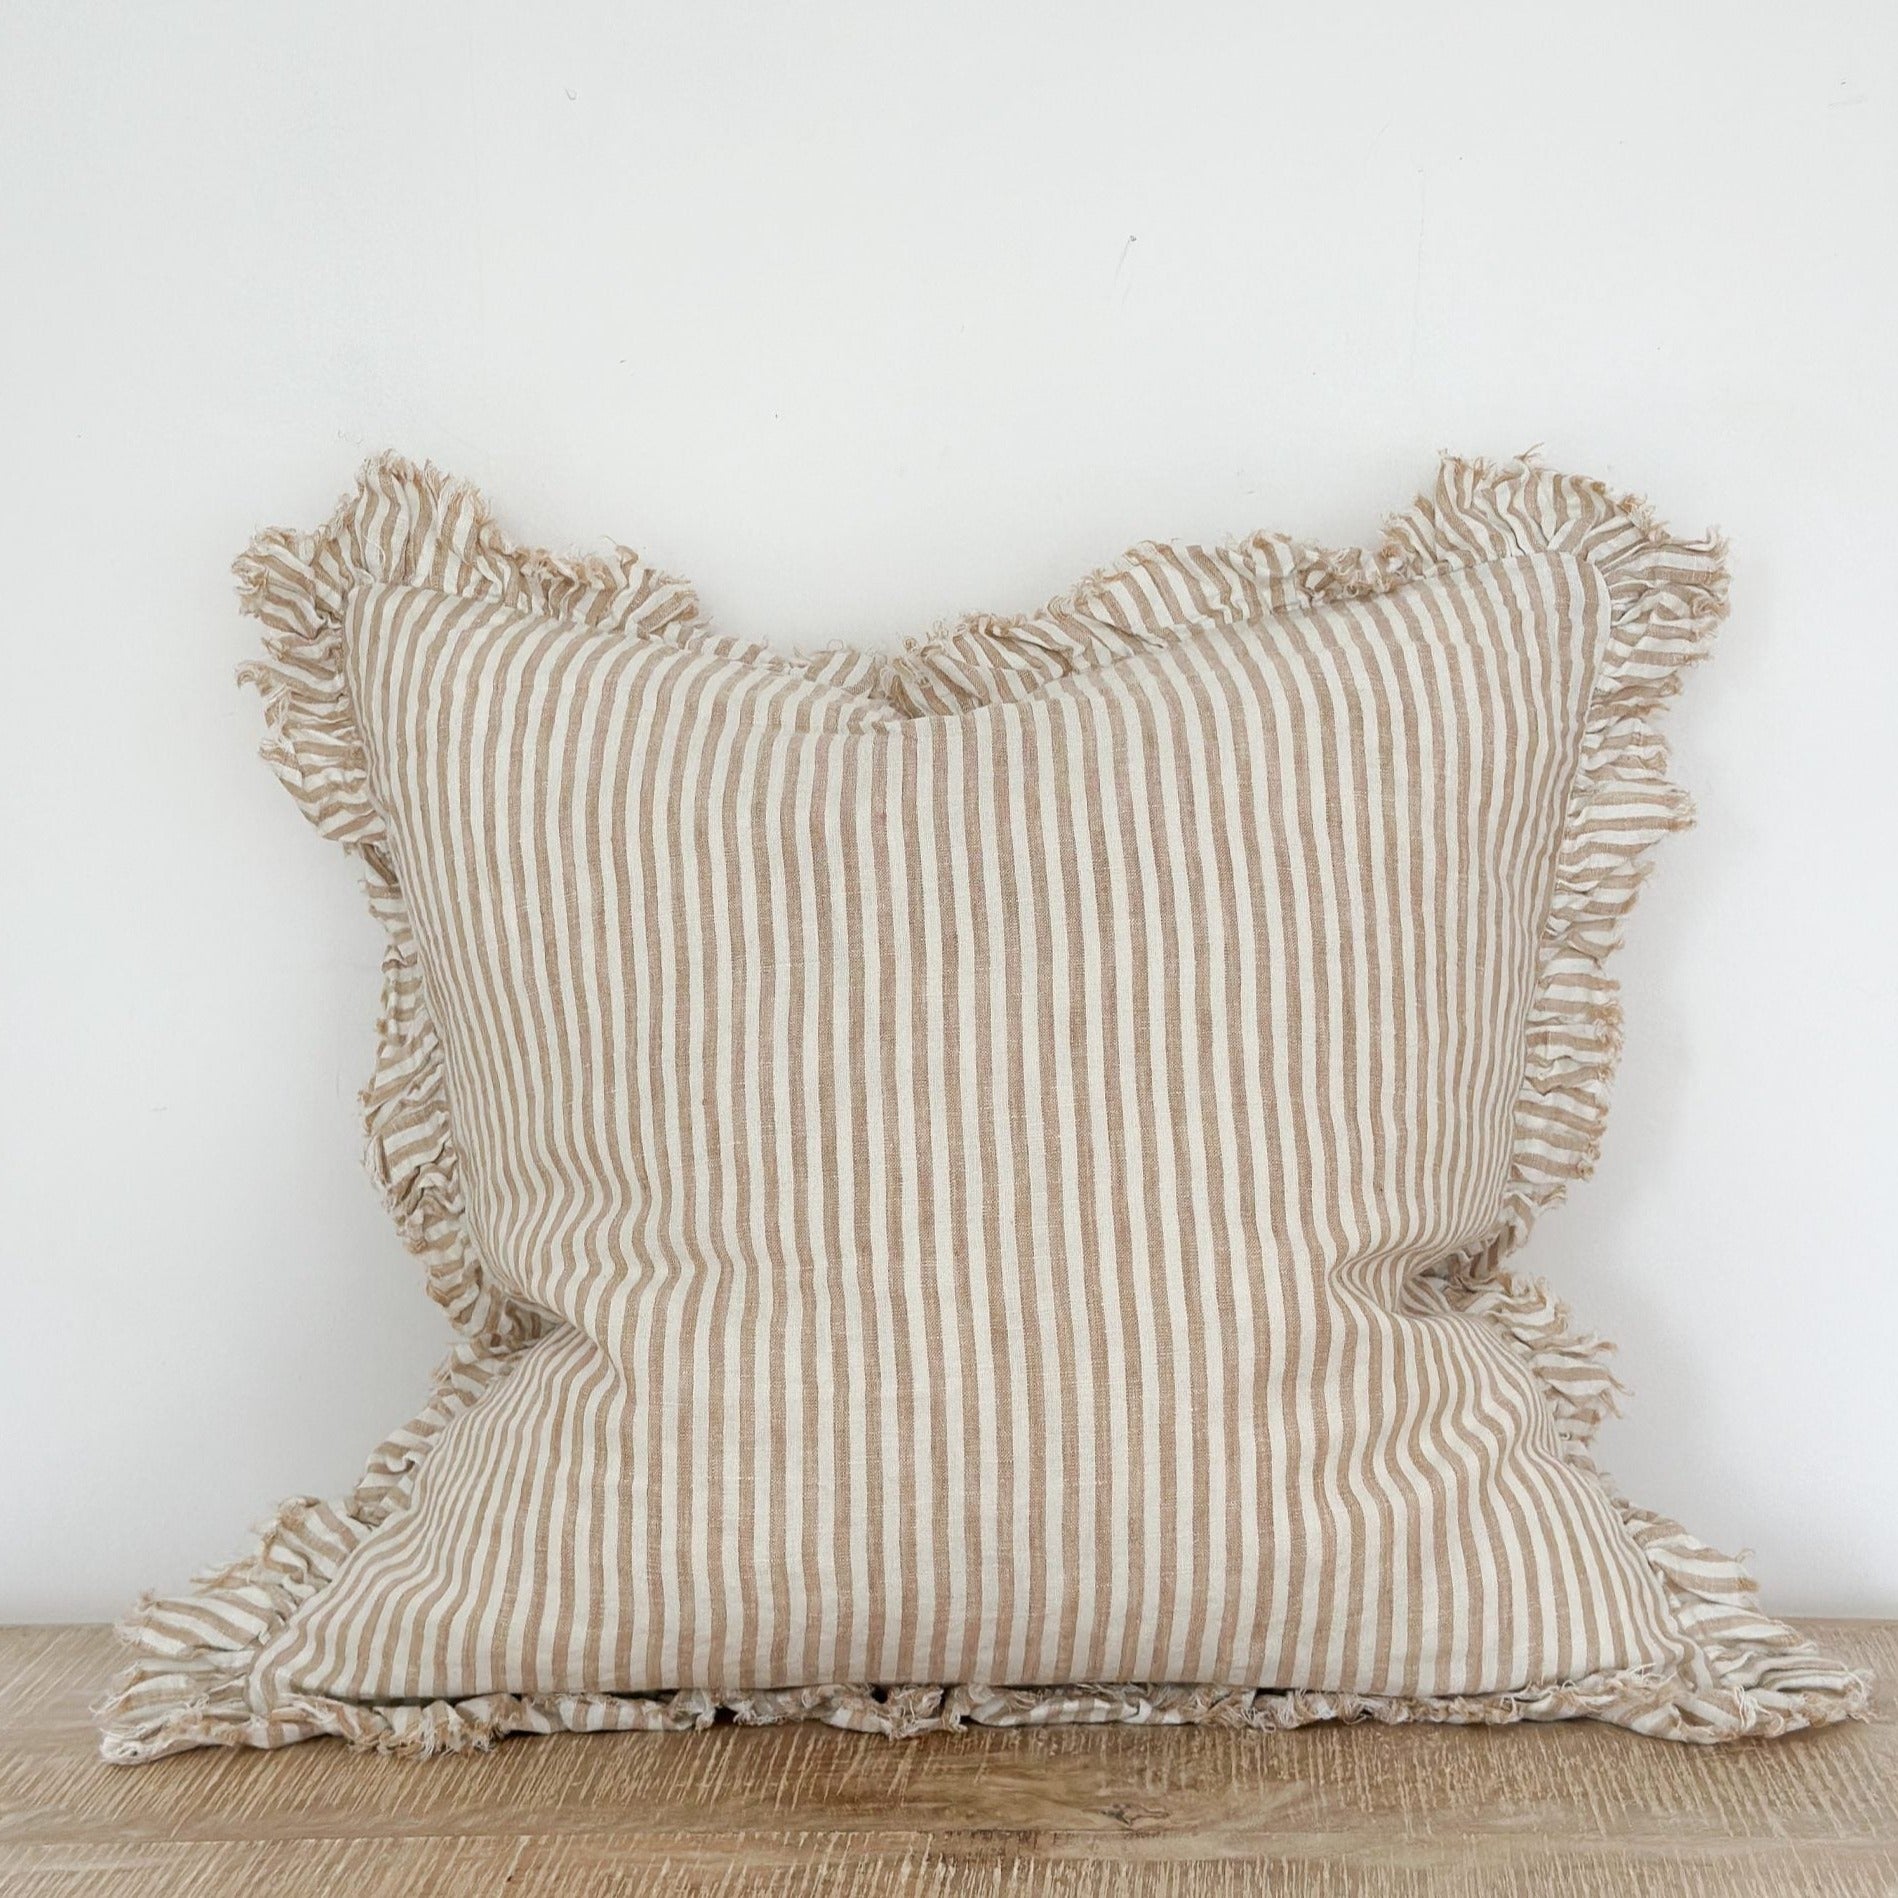 Light brown striped cushion with ruffled frayed edge.